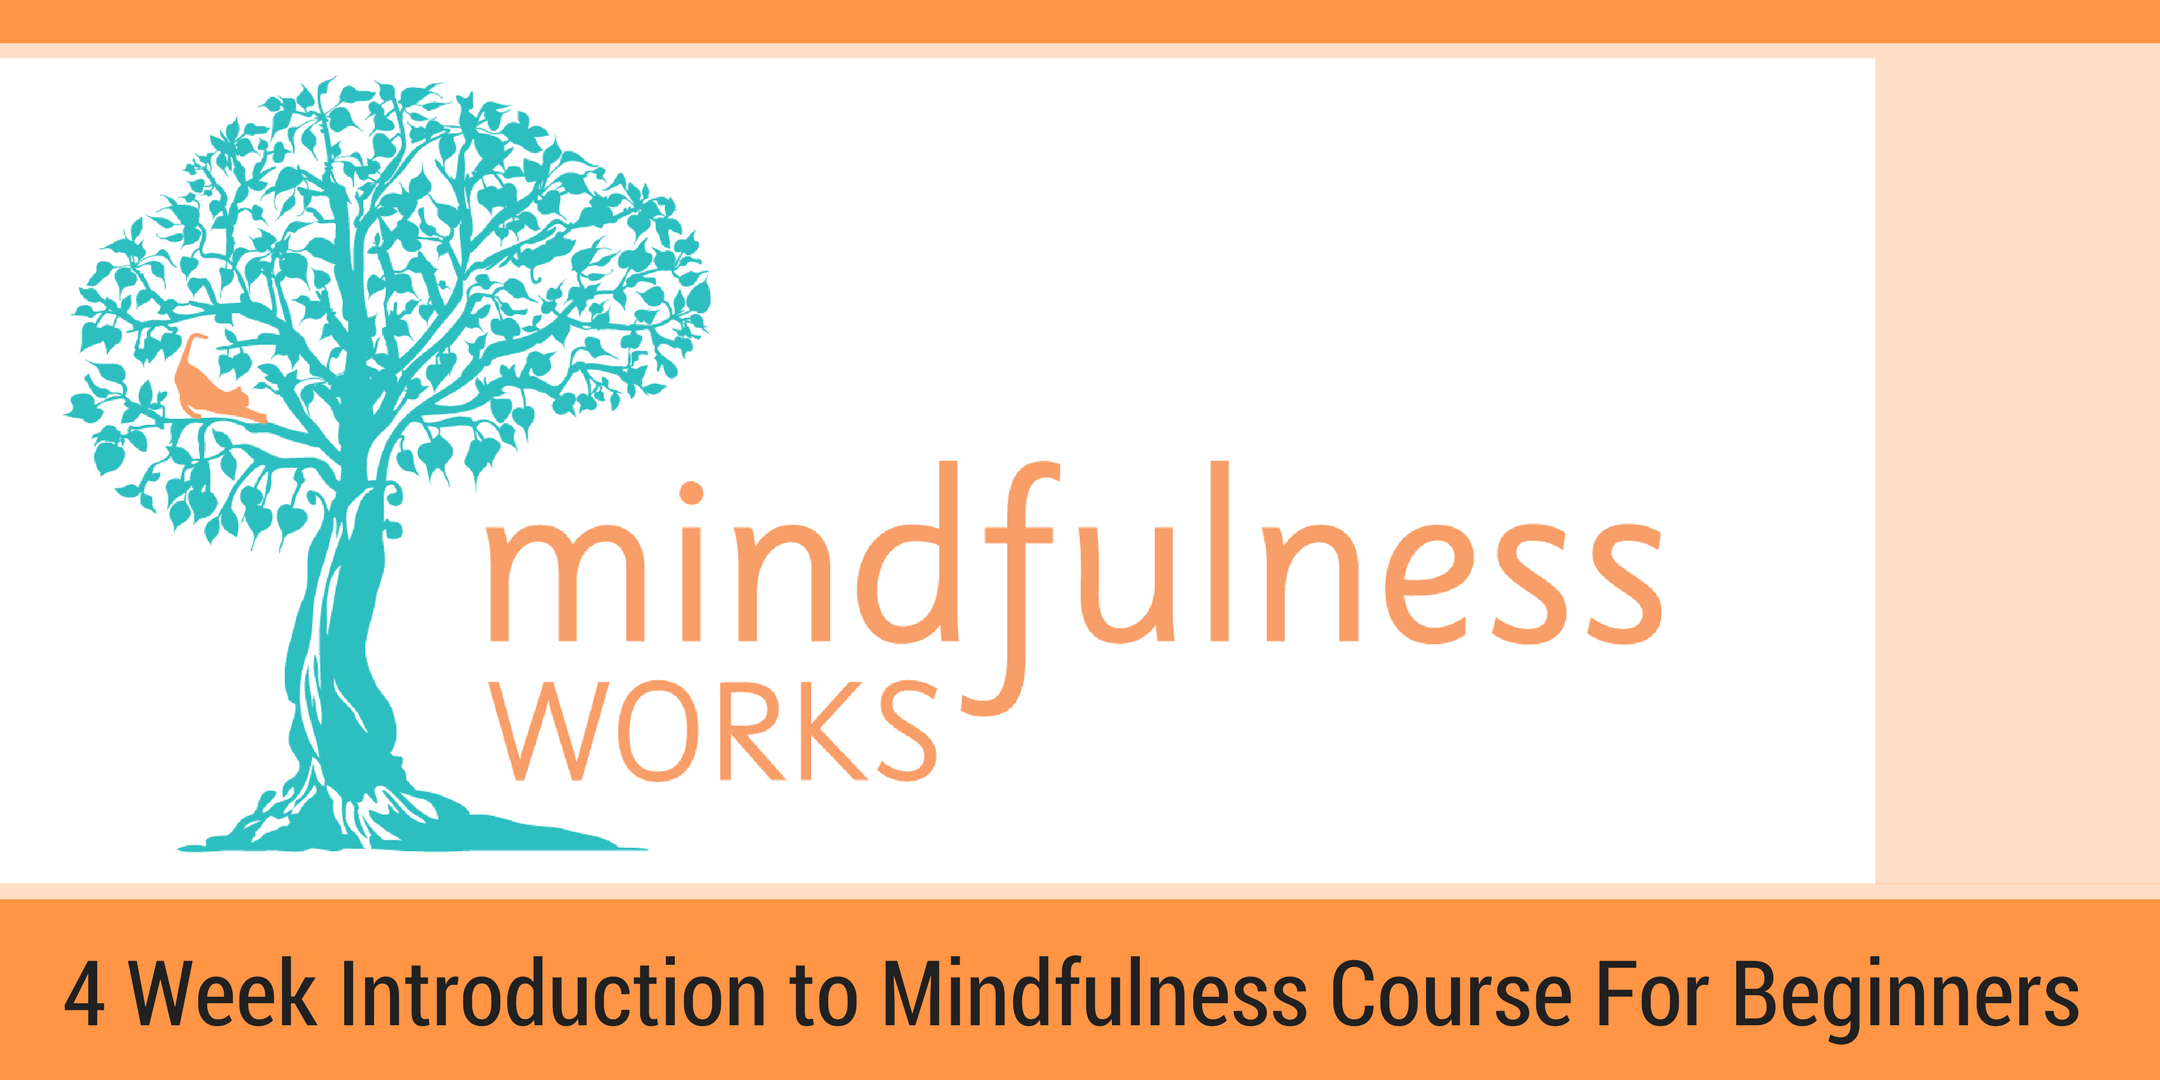 Wollongong (Dapto) – An Introduction to Mindfulness & Meditation 4 Week Course